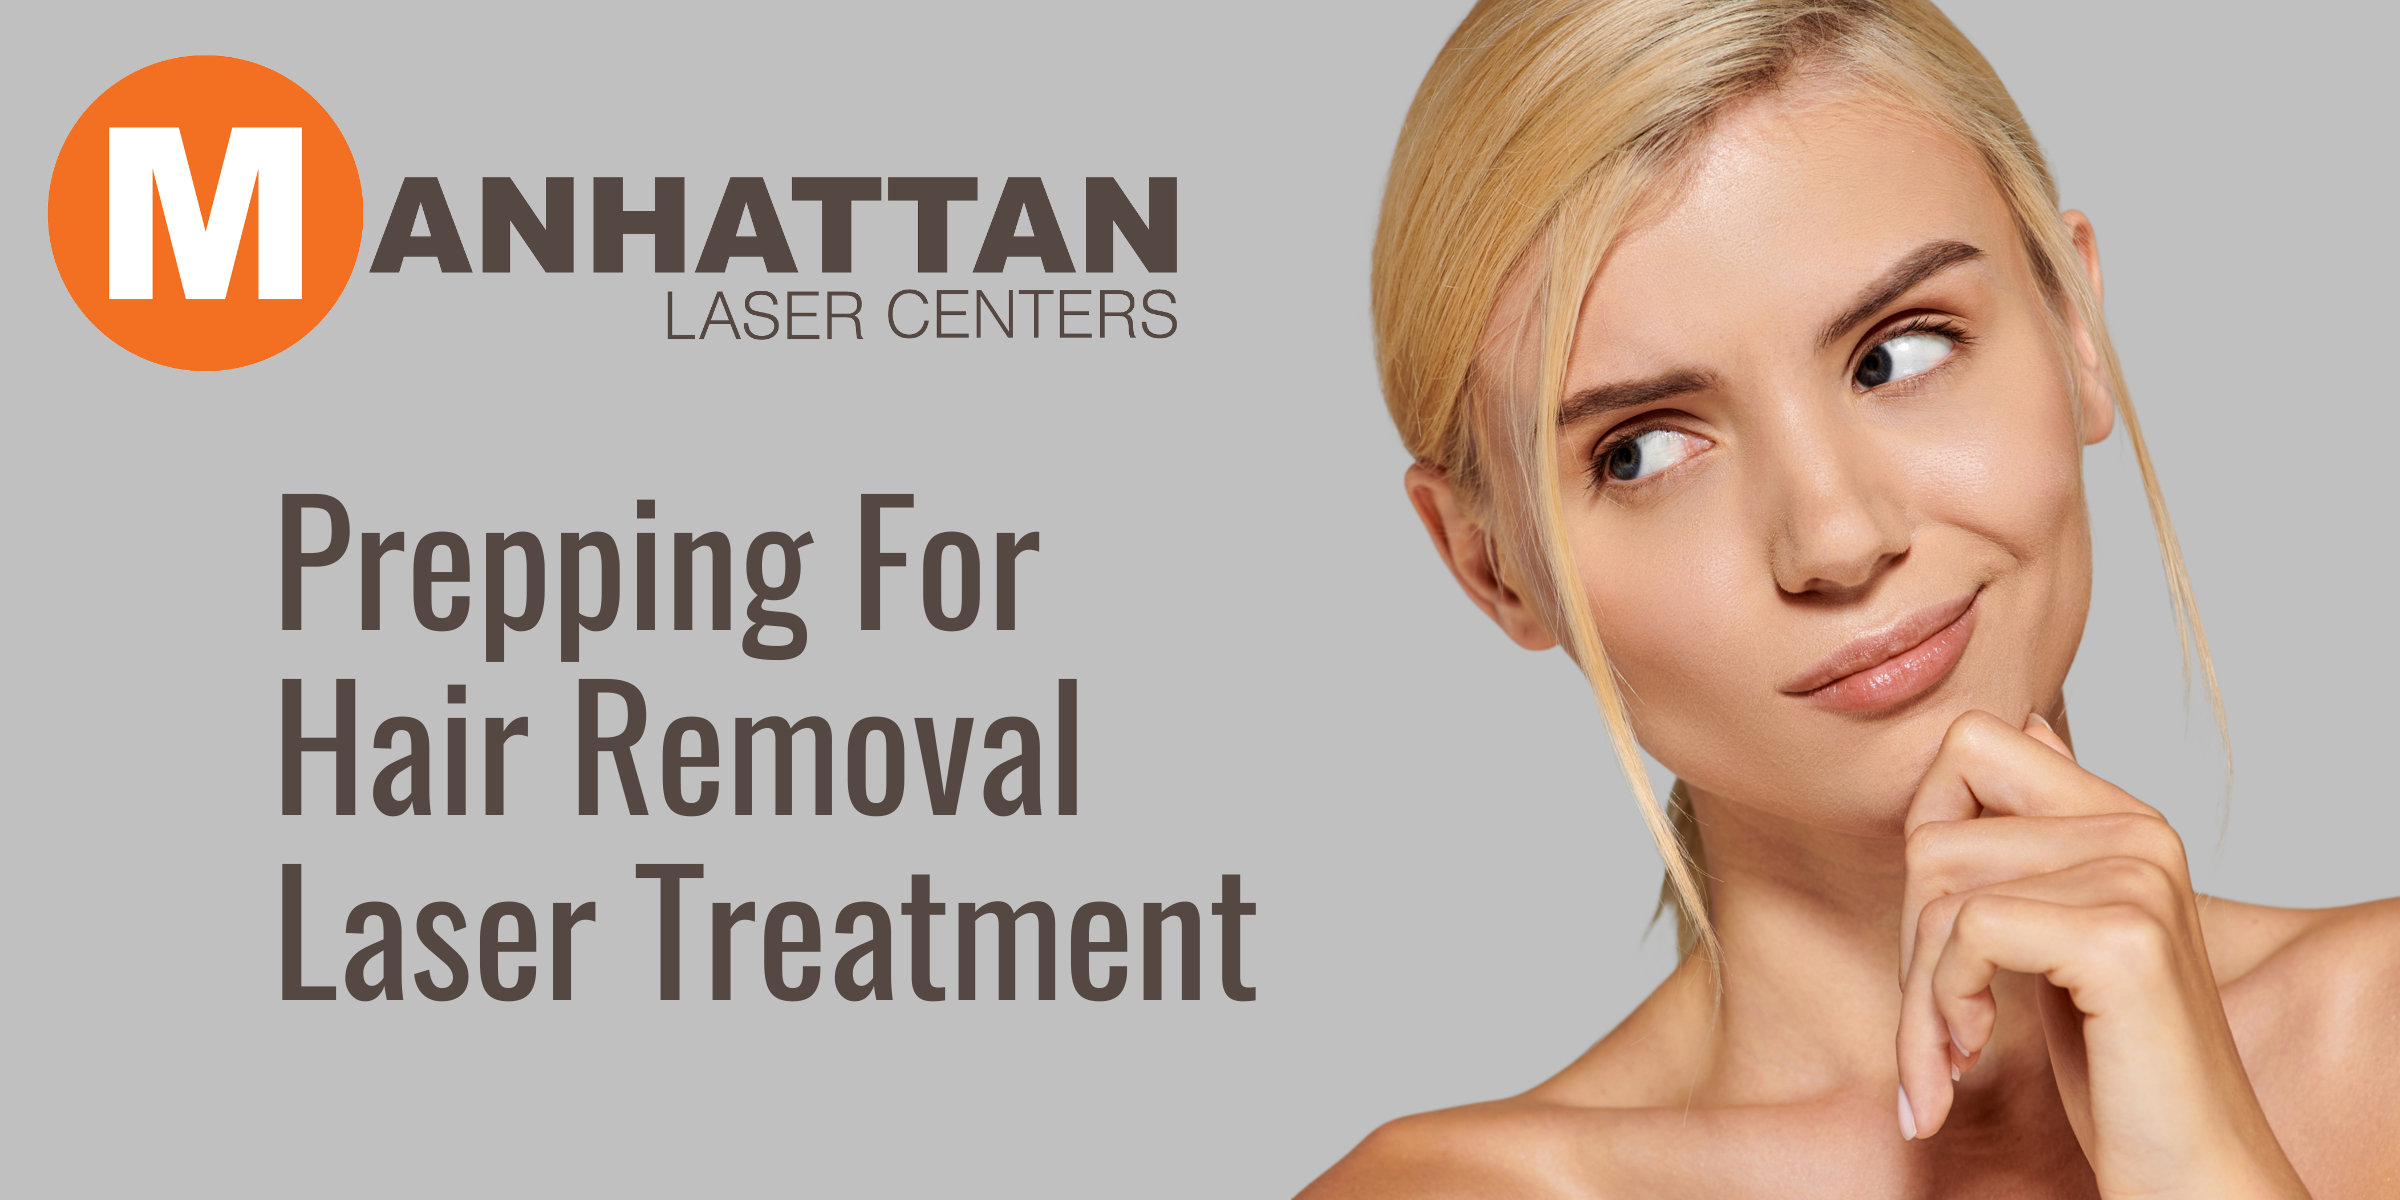 Prepping For Hair Removal Laser Treatment